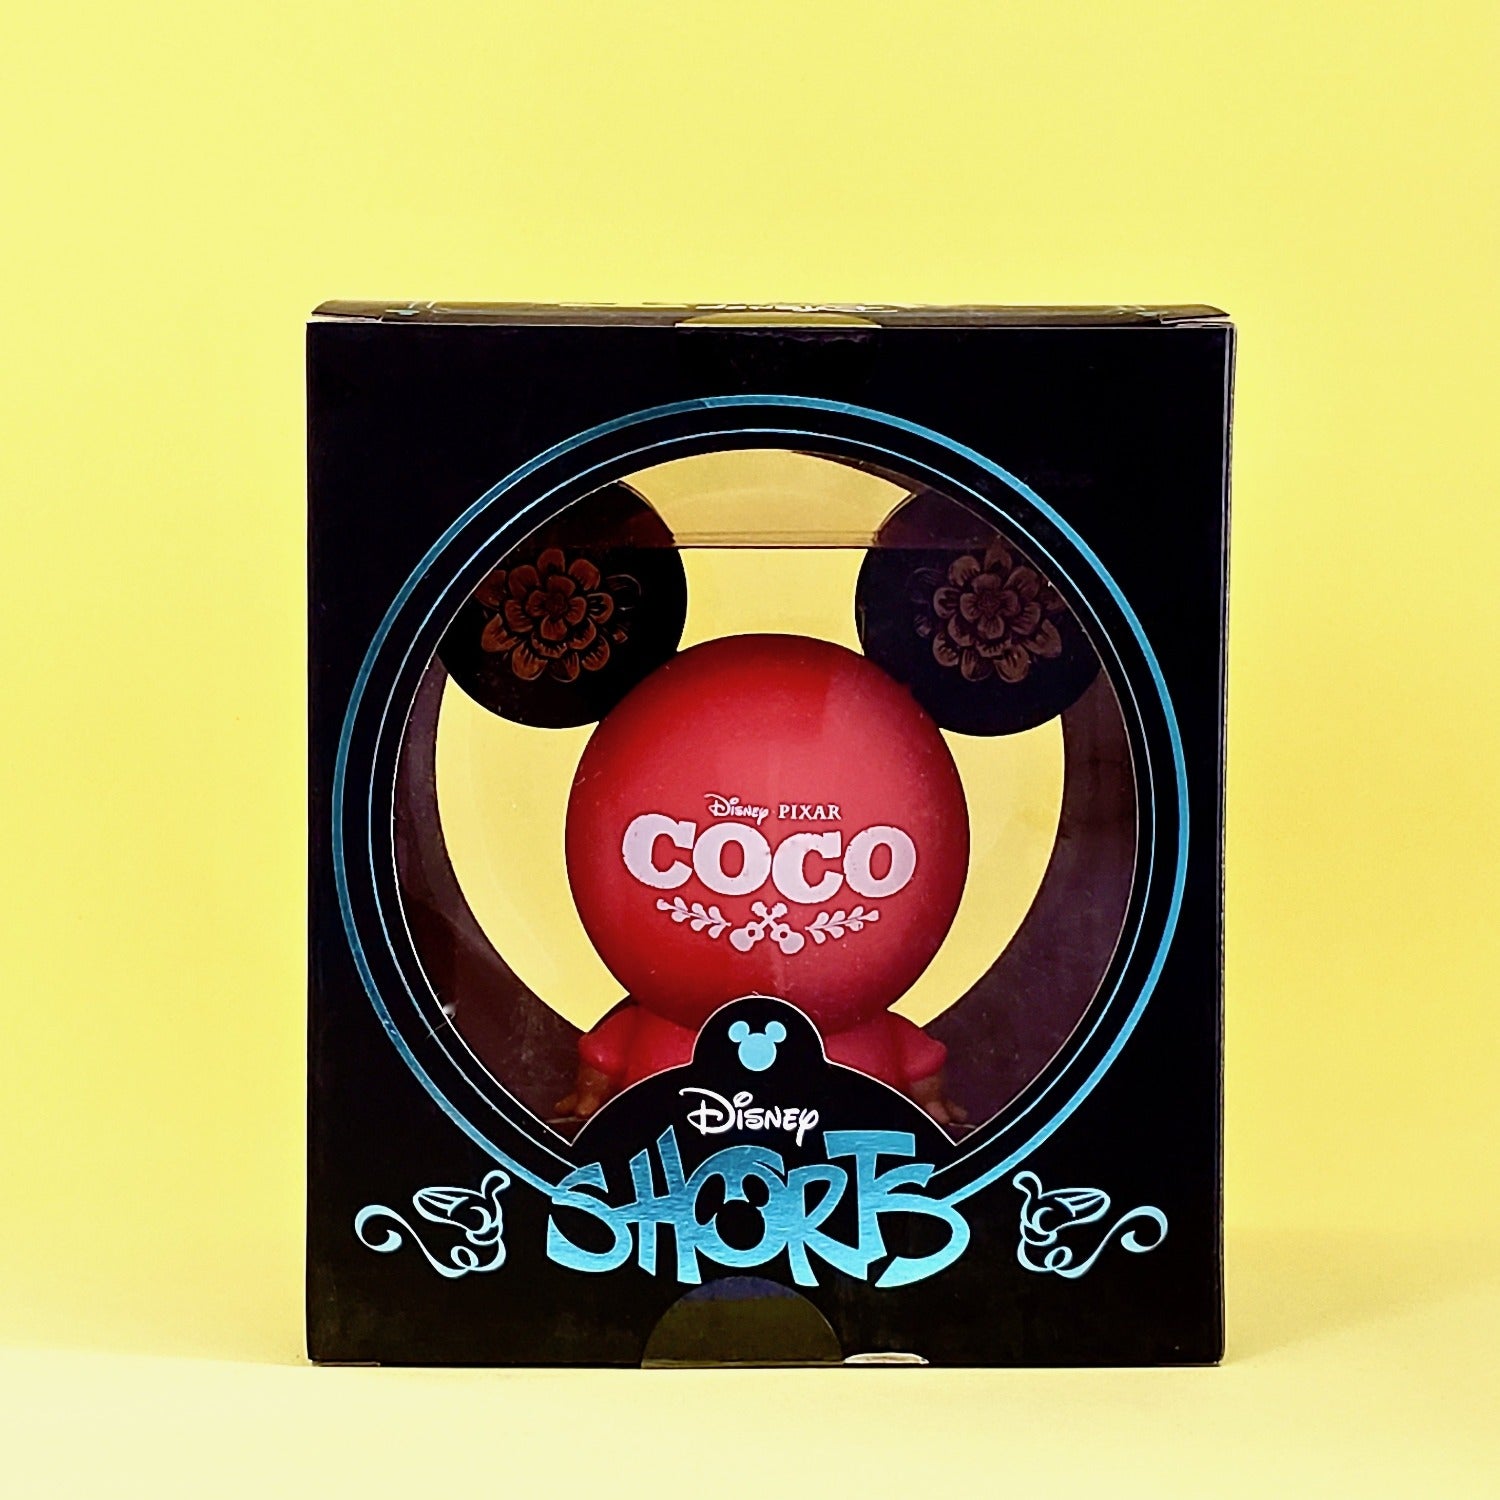 Disney Shorts Series 2 Coco Miguel box back view